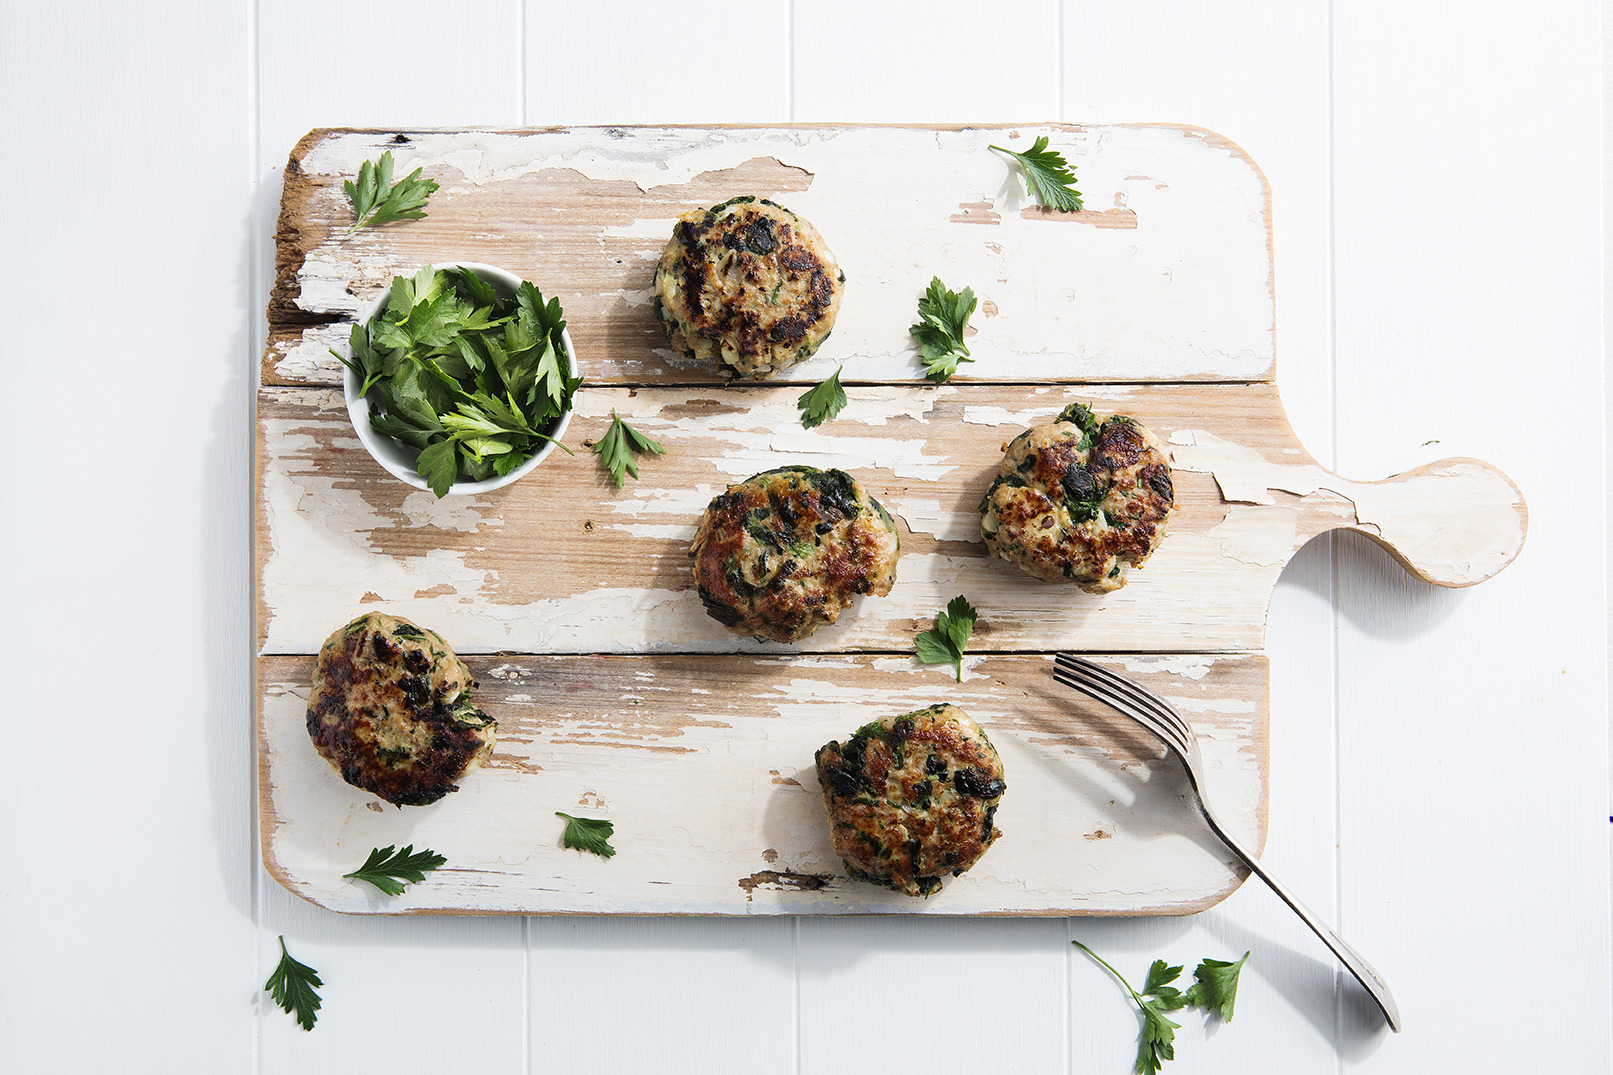 Image of five Turkey and Spinach Rissoles served on a large wooden cutting board with a fork and herbs on the side